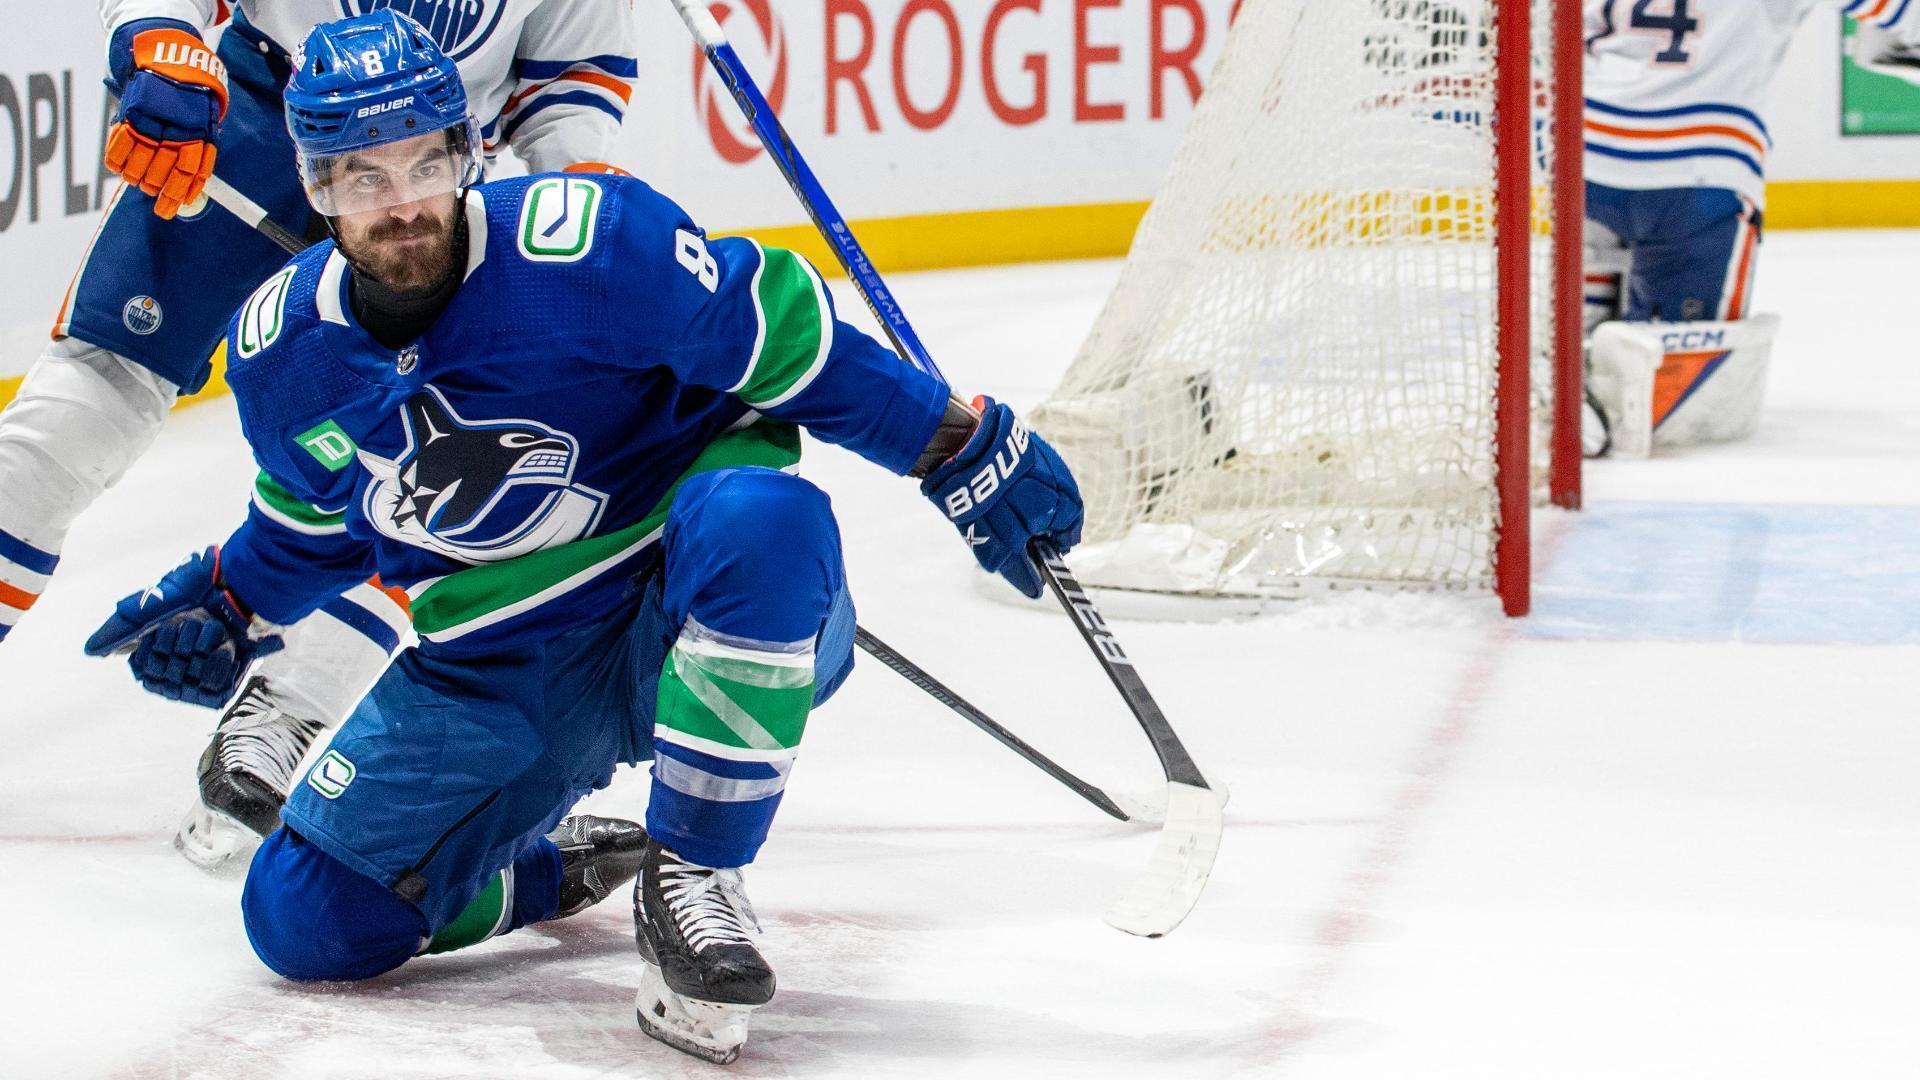 Canucks stun Oilers with 2 goals in 39 seconds to take lead